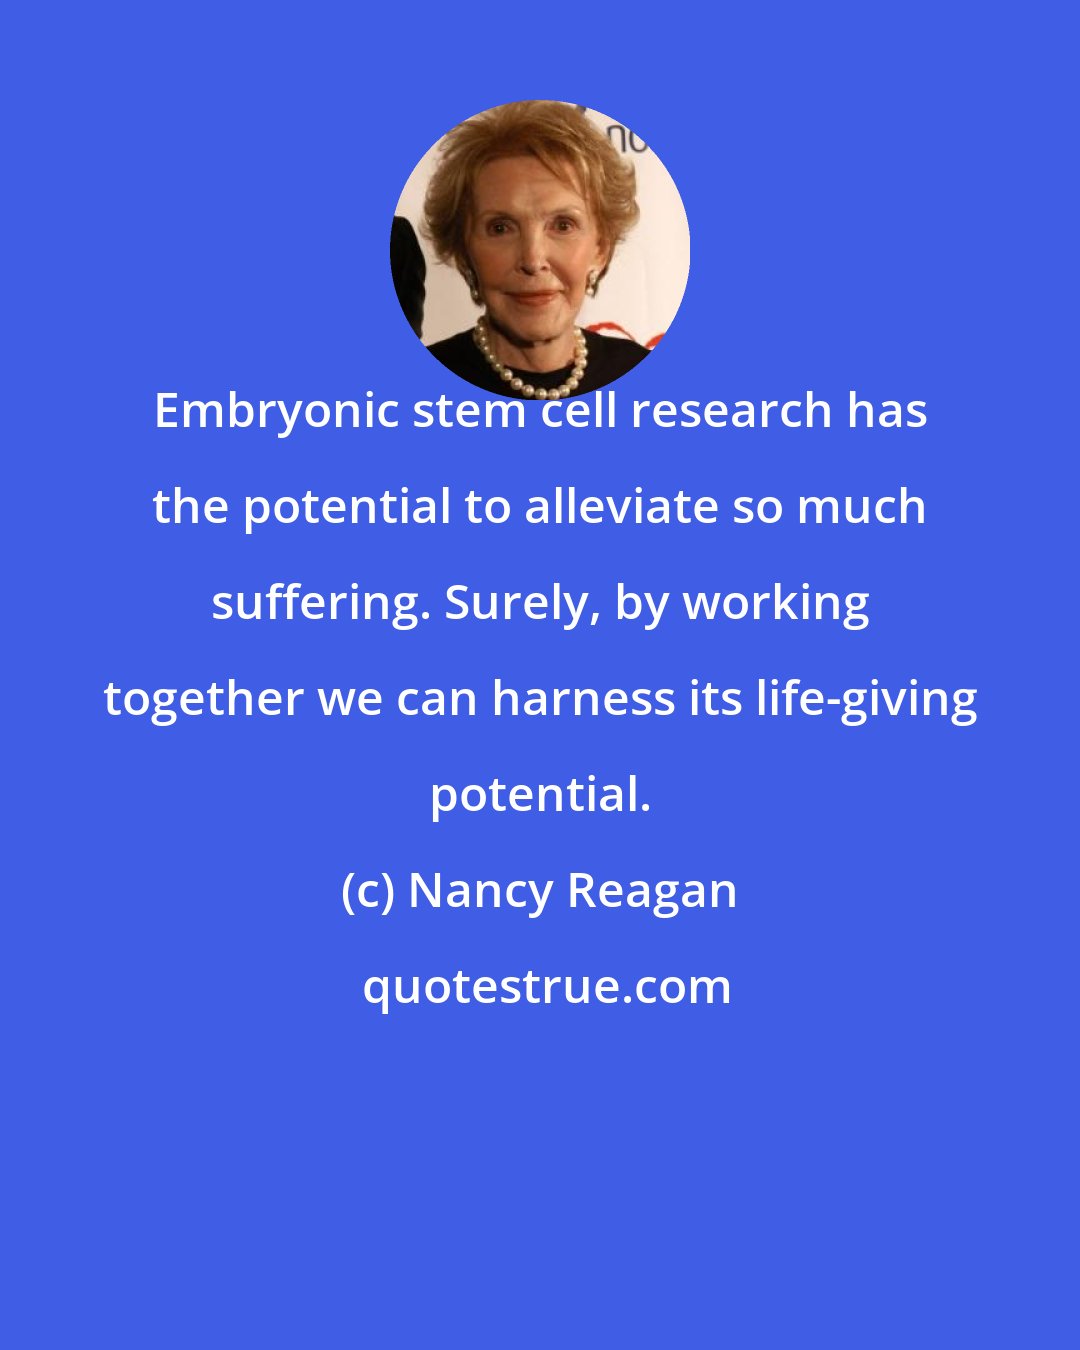 Nancy Reagan: Embryonic stem cell research has the potential to alleviate so much suffering. Surely, by working together we can harness its life-giving potential.